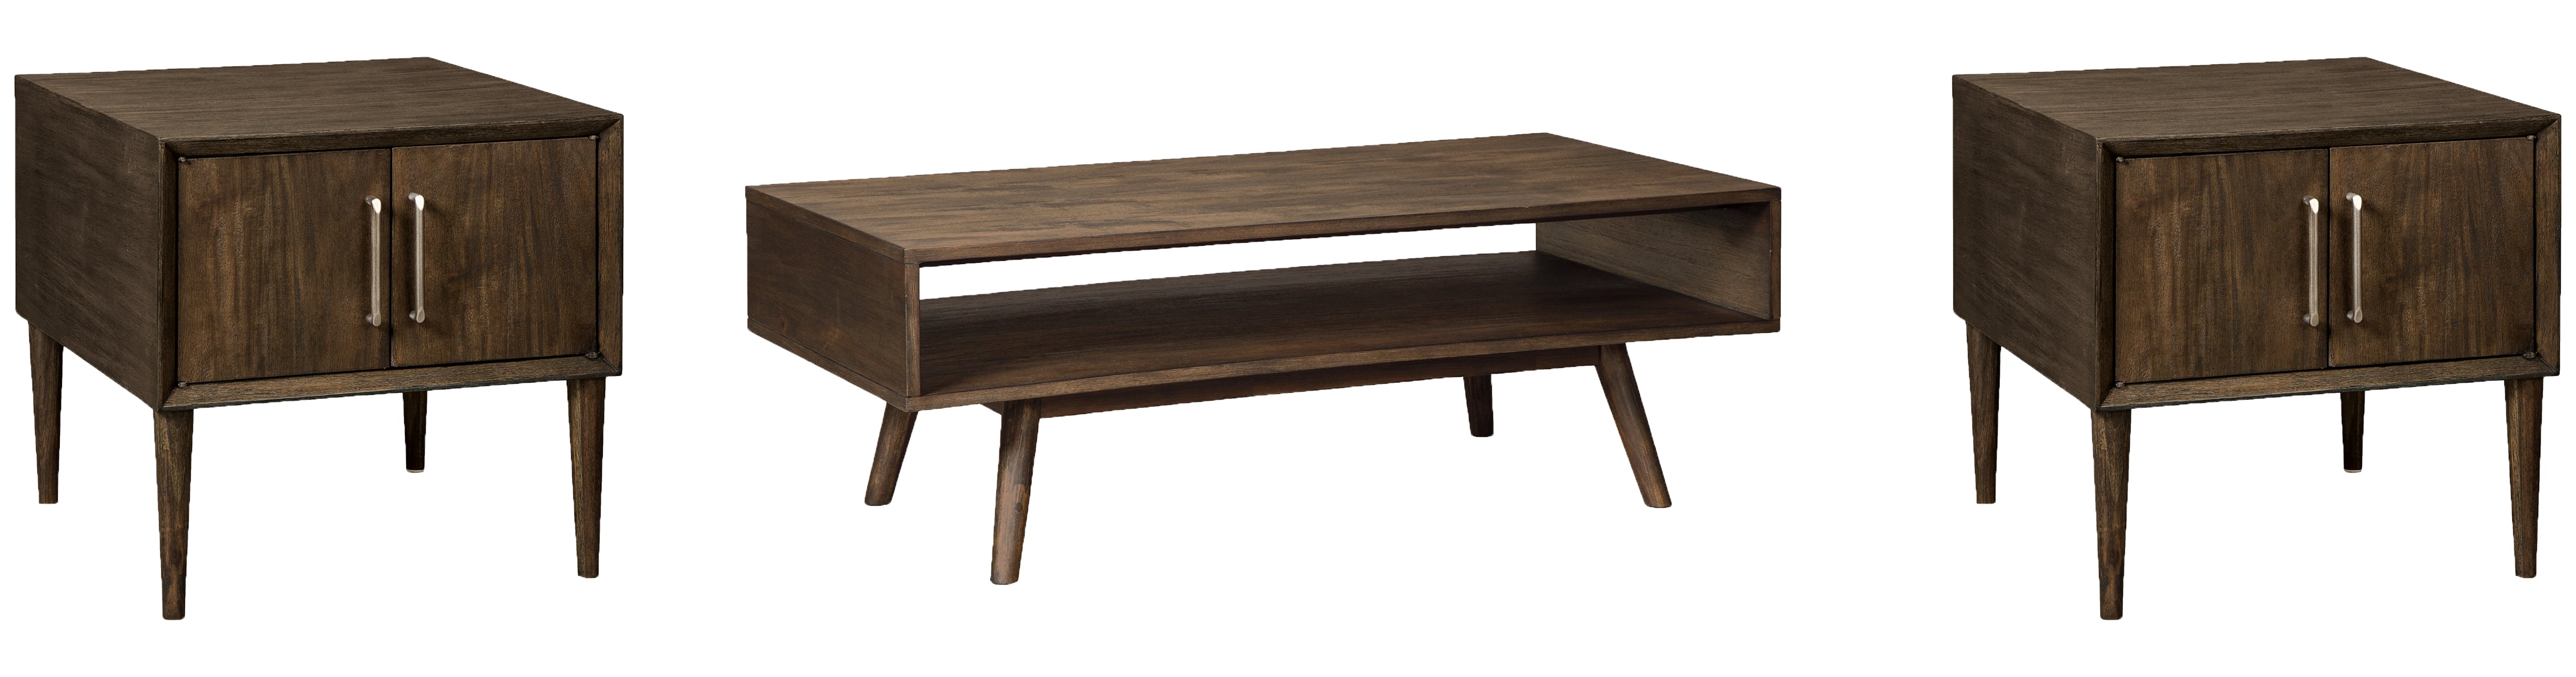 Kisper Coffee Table with 2 End Tables